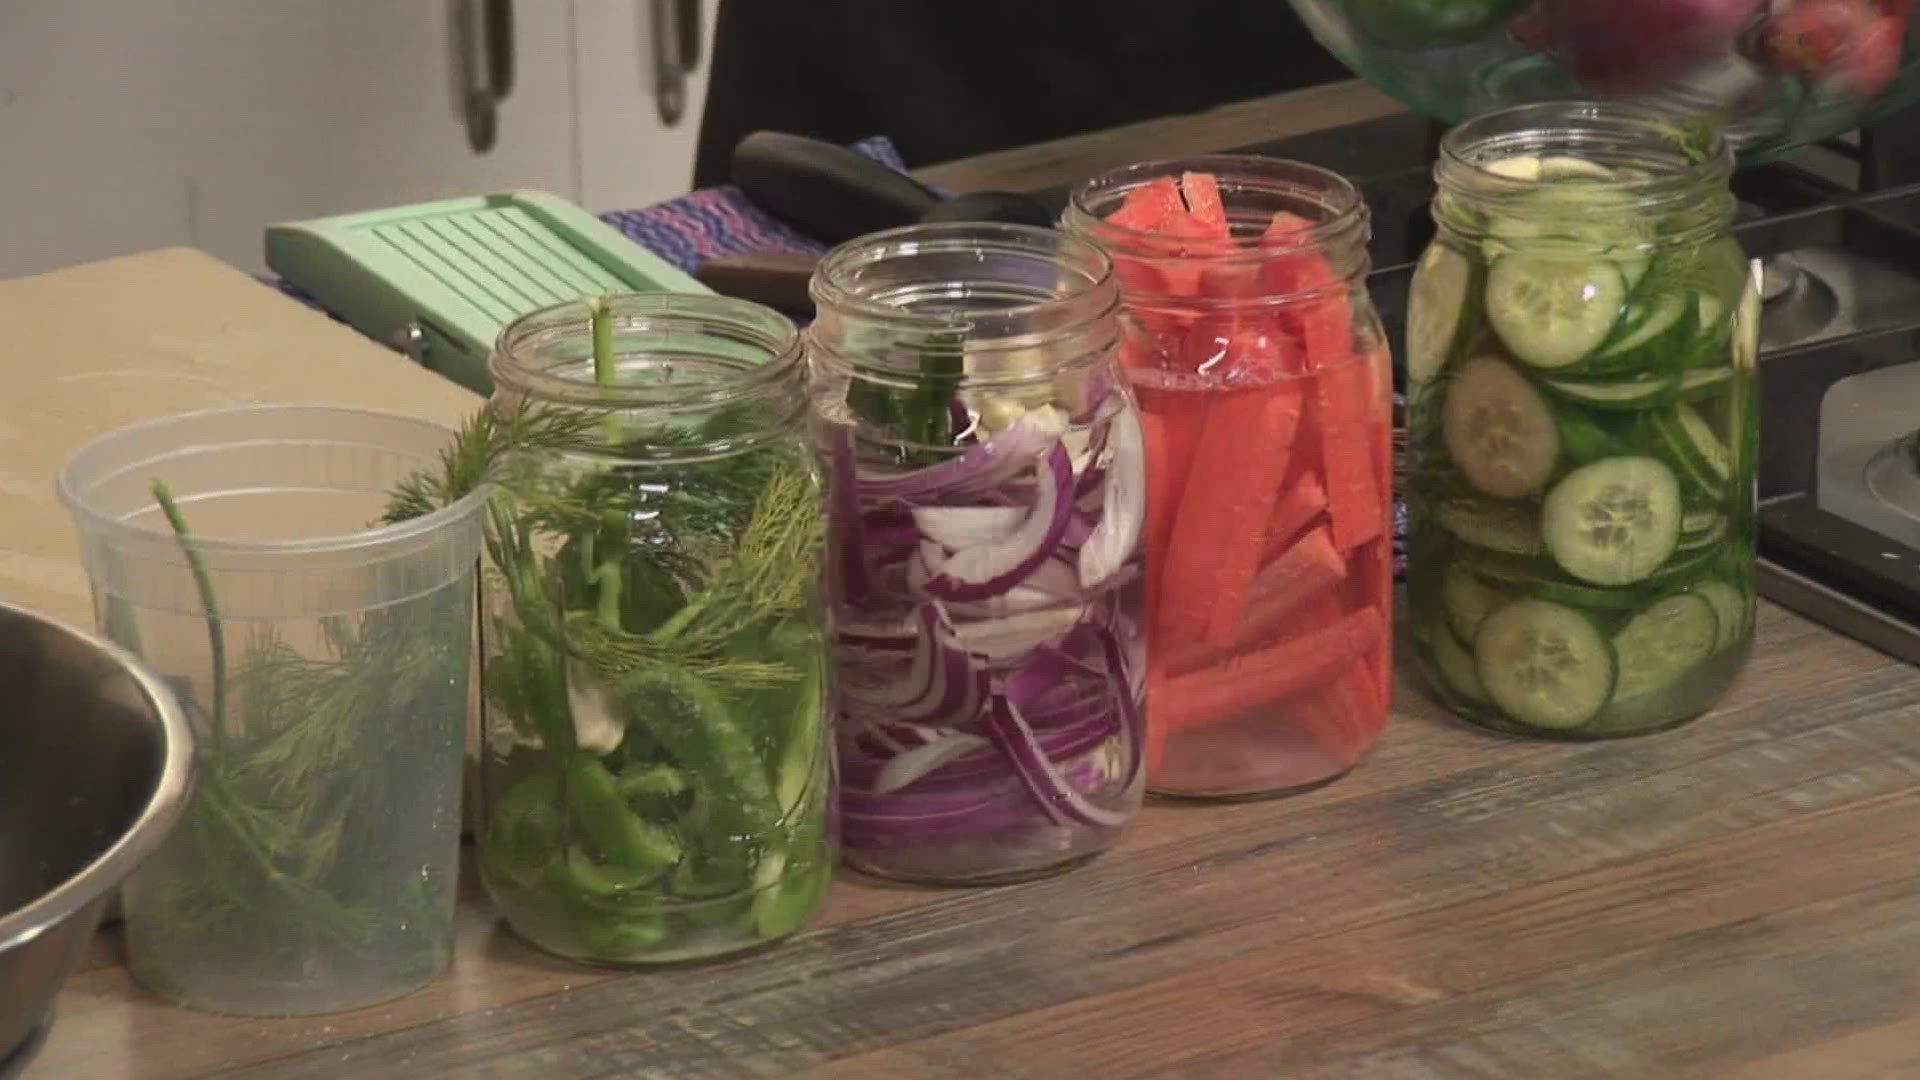 Chef Ben Hasty shows us that they're easy to make, and add a nice crunch to your salad or sandwich!